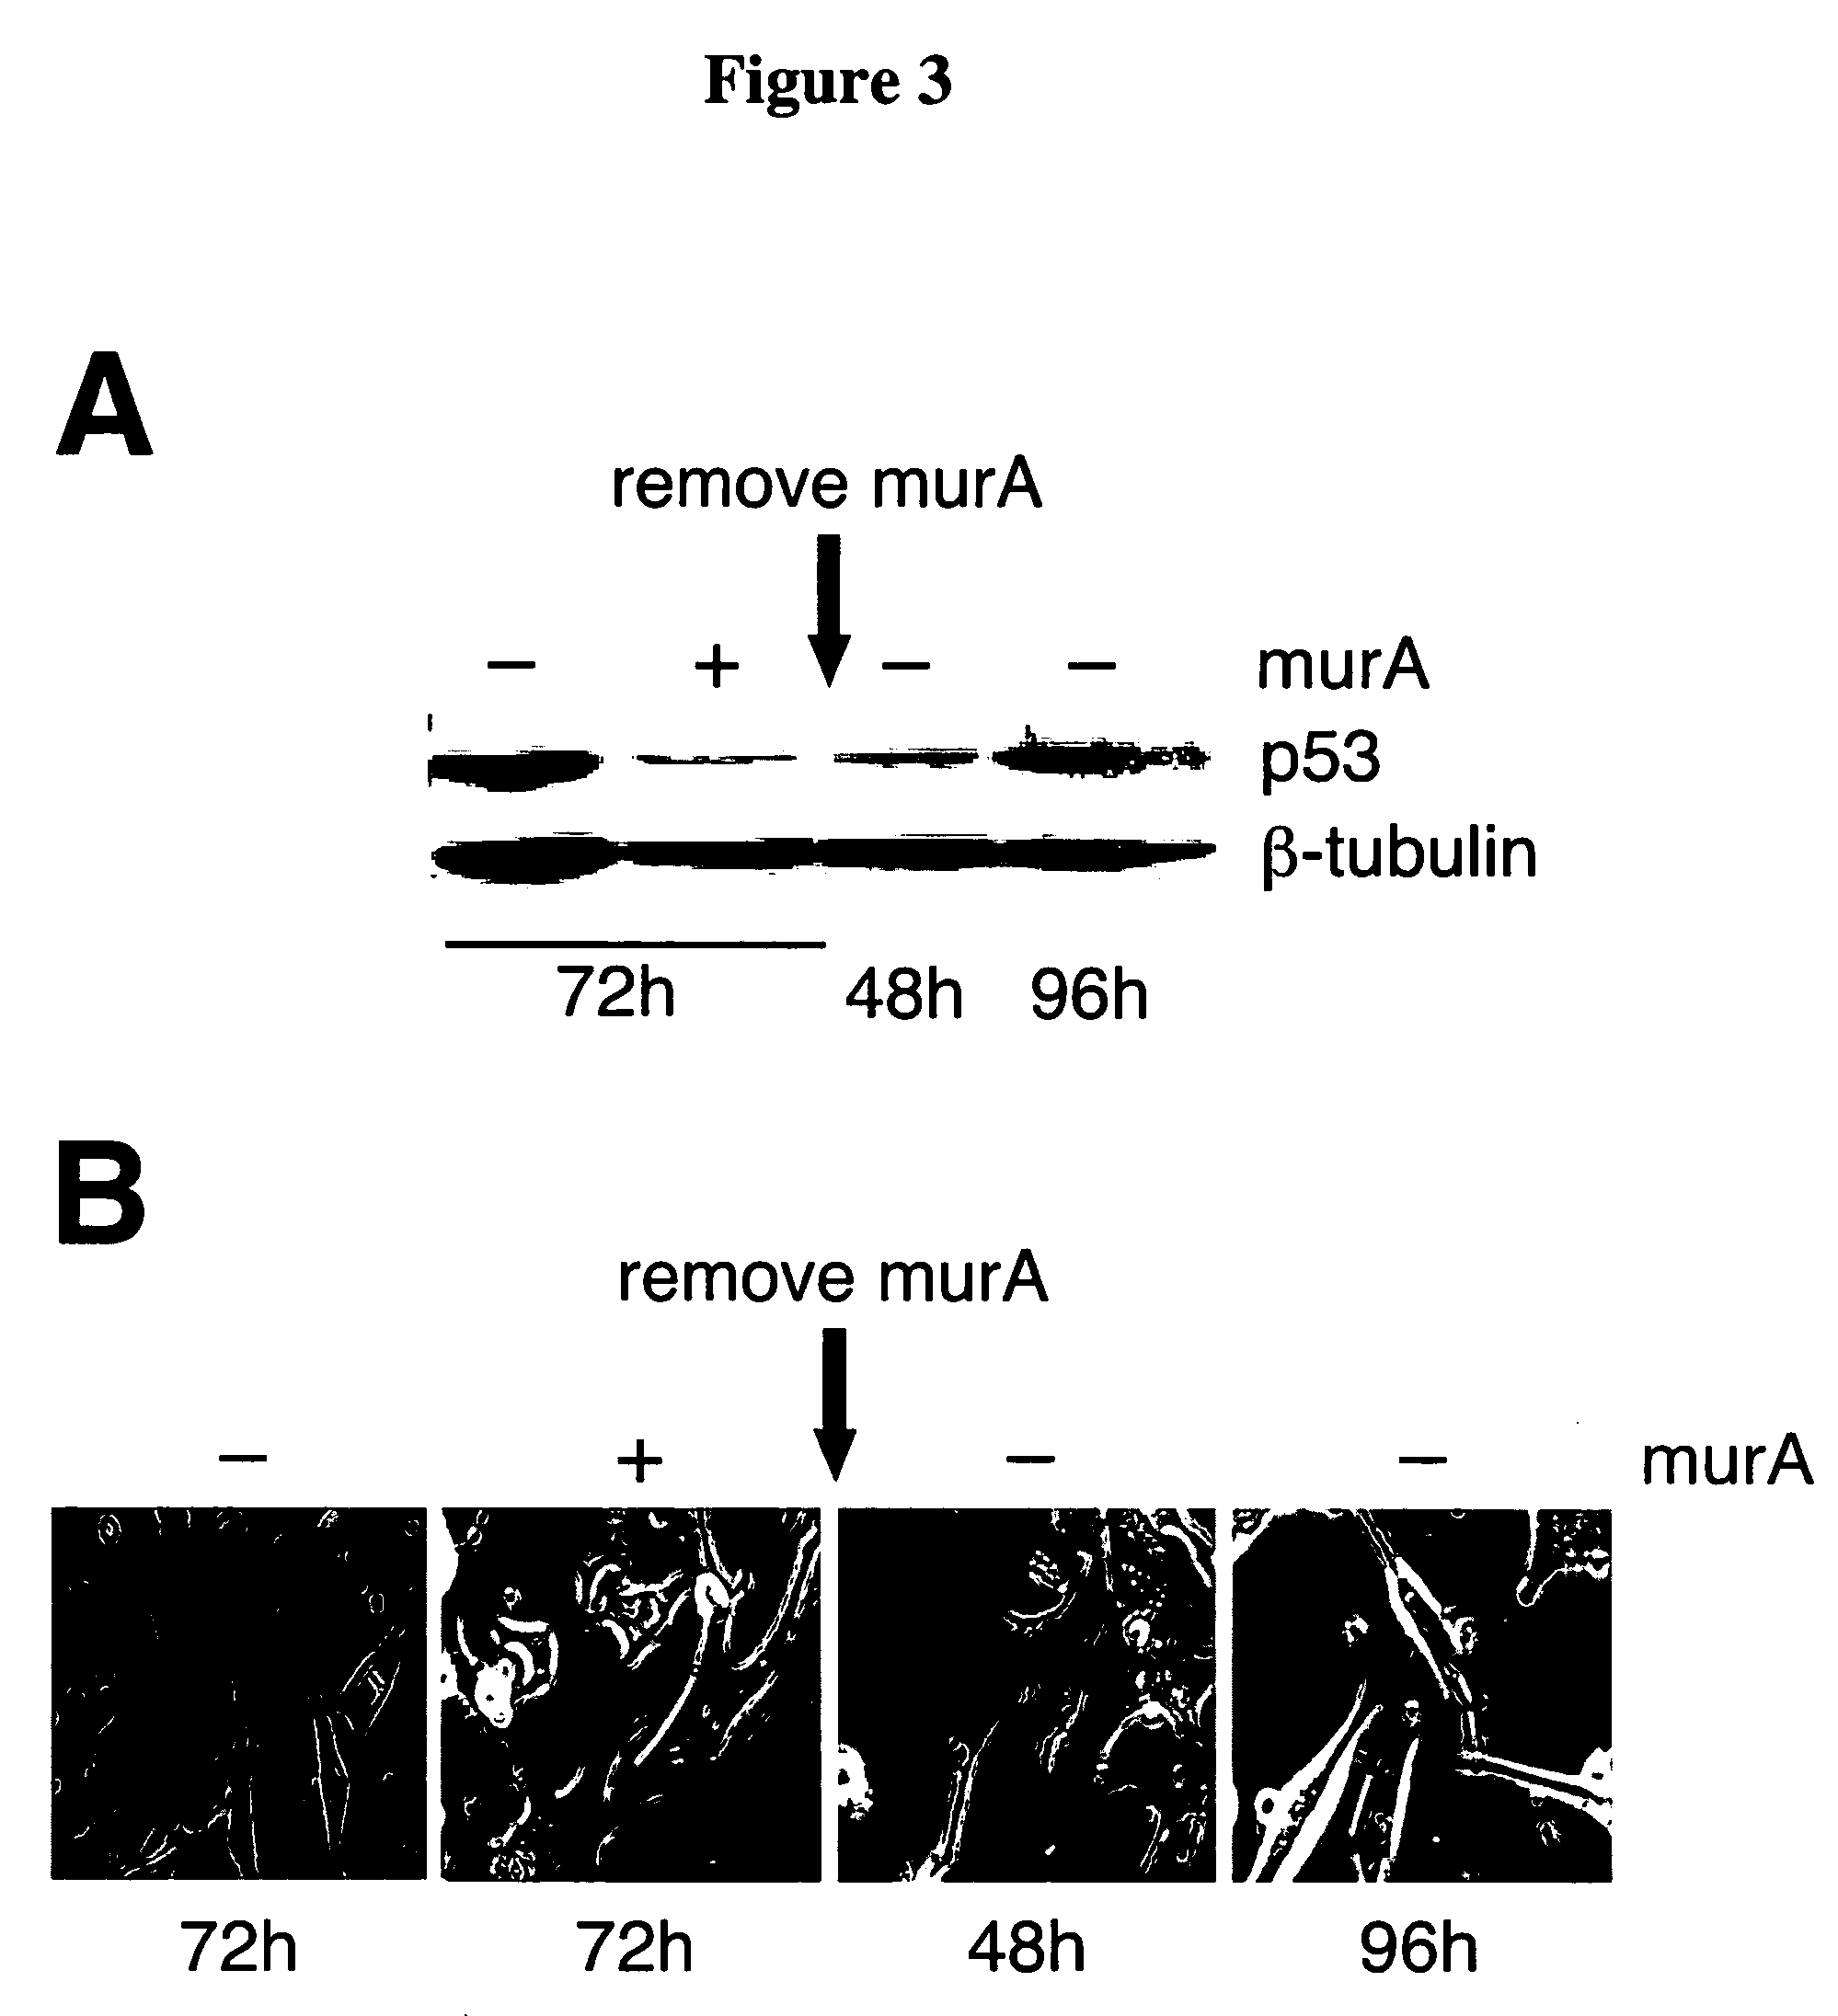 Regulated polymerase III expression systems and related methods